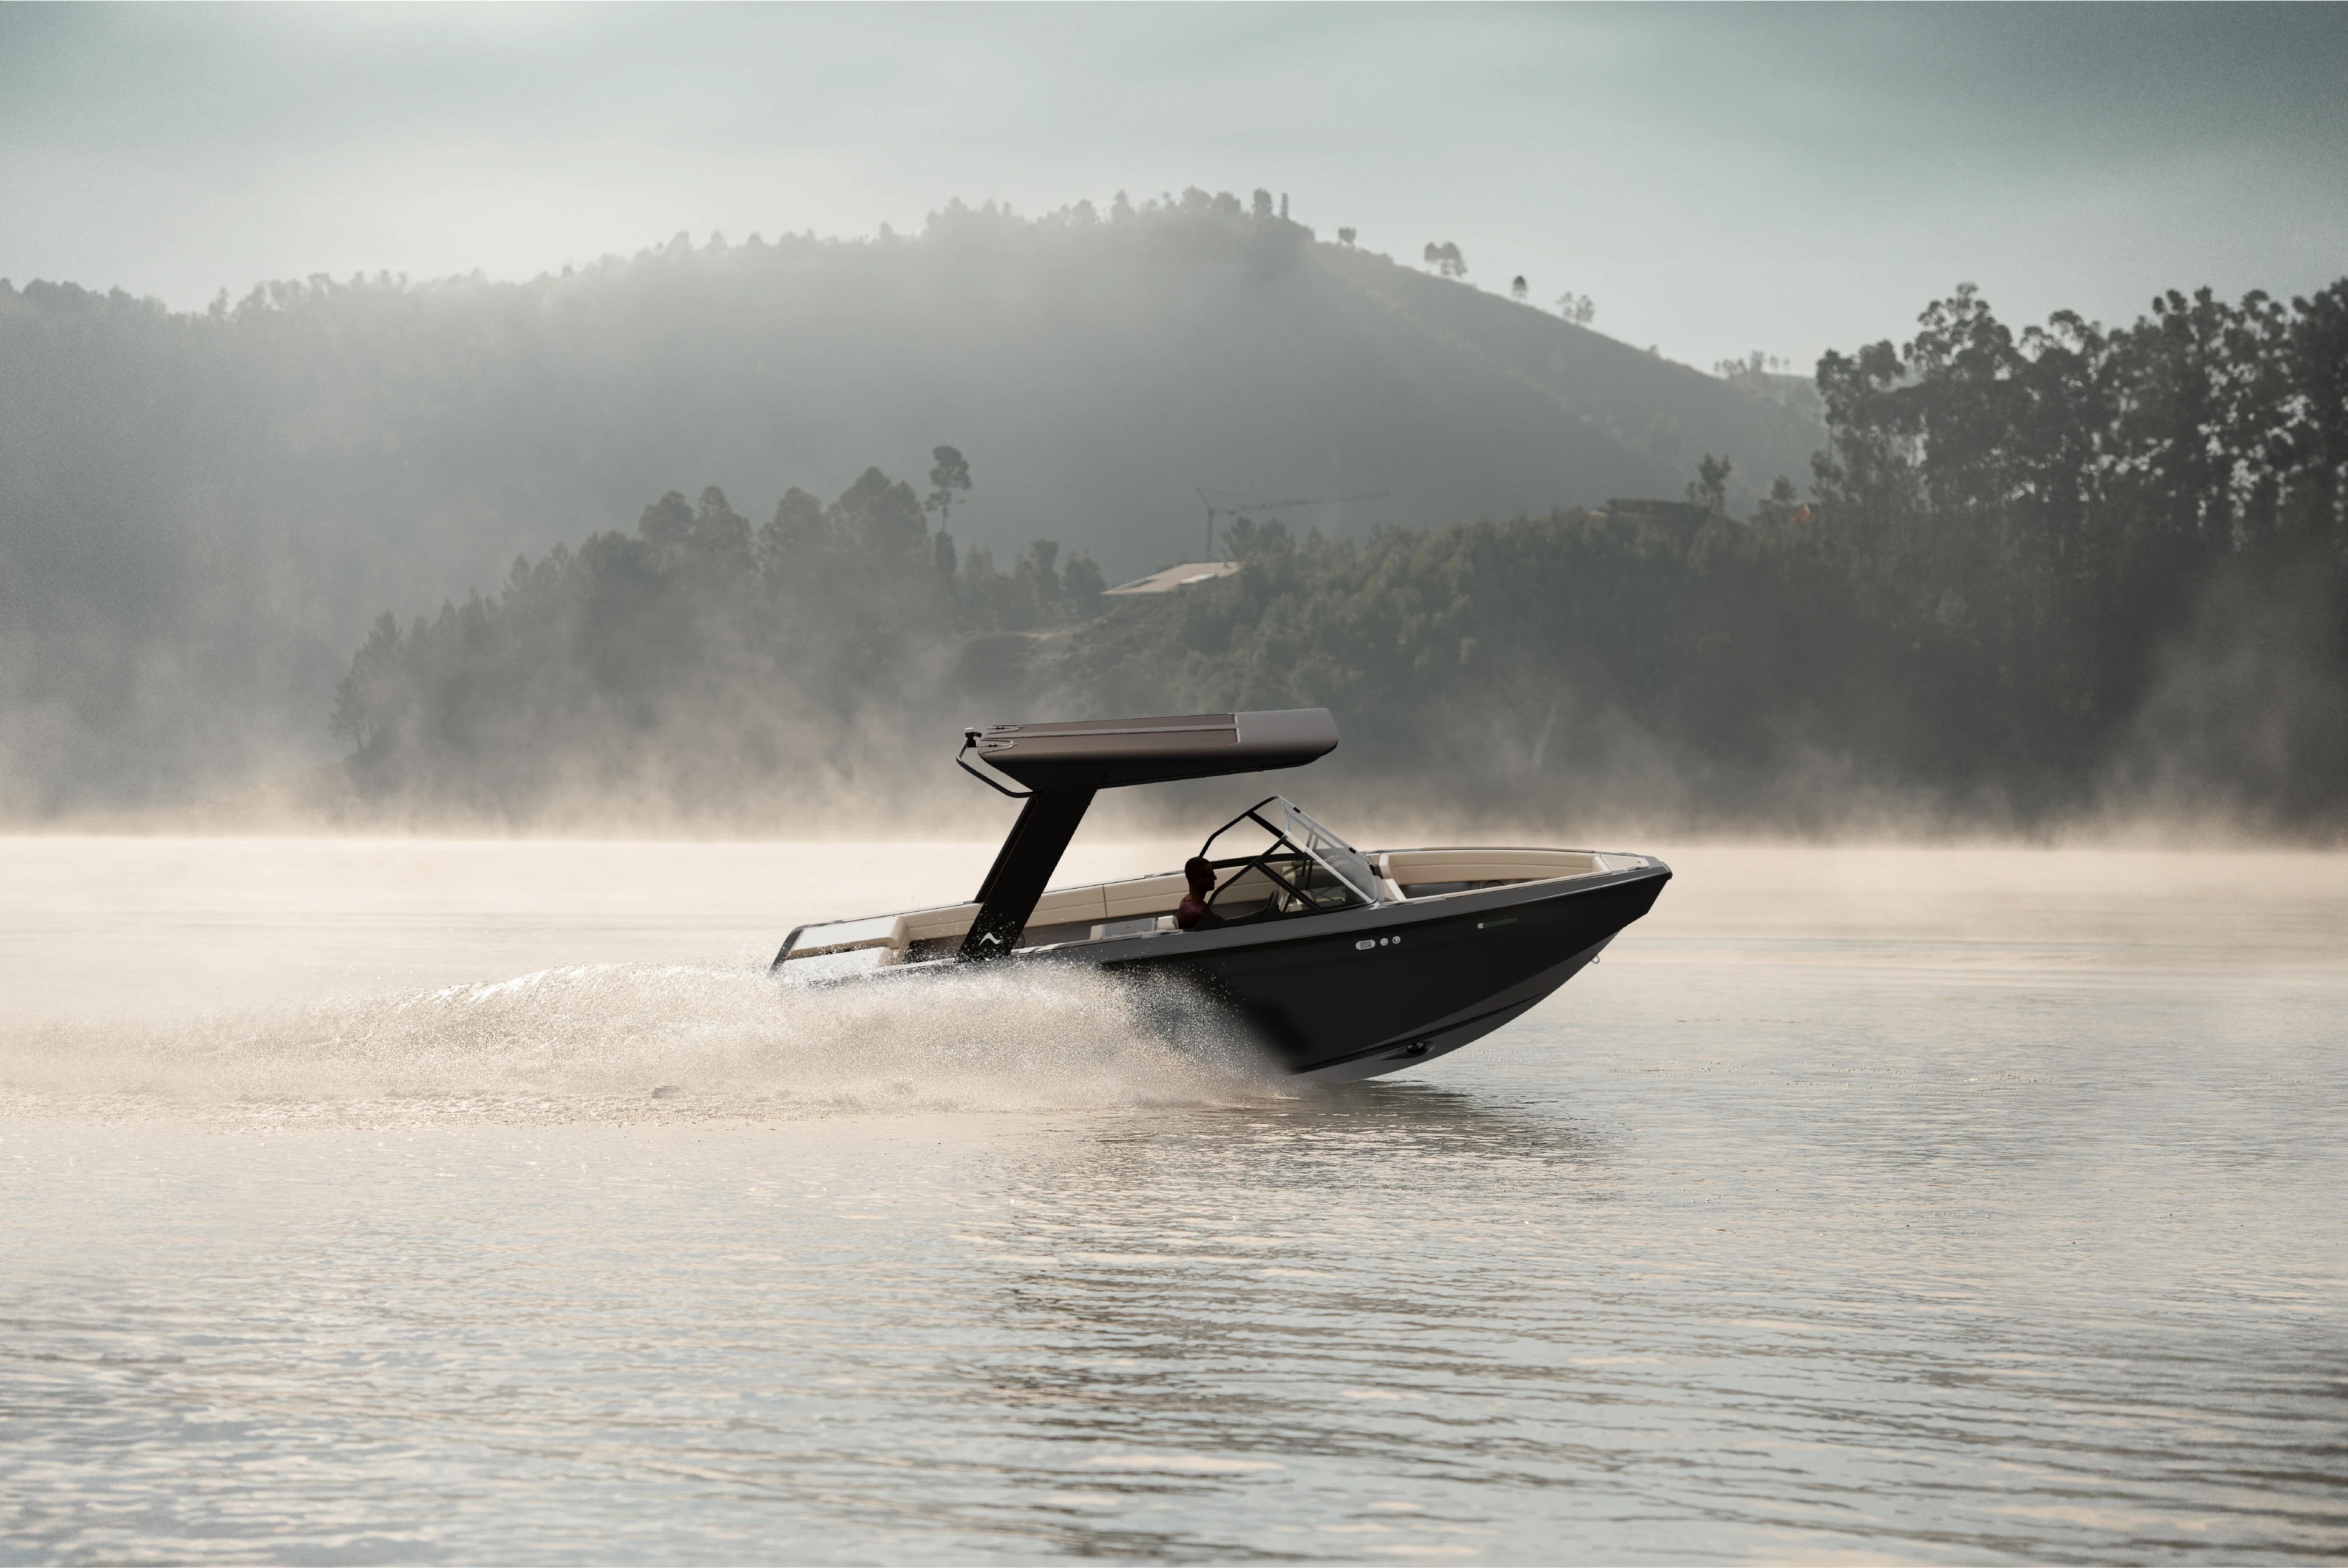 A dramatic image of an Arc Sport quickly turning on a misty lake in the morning